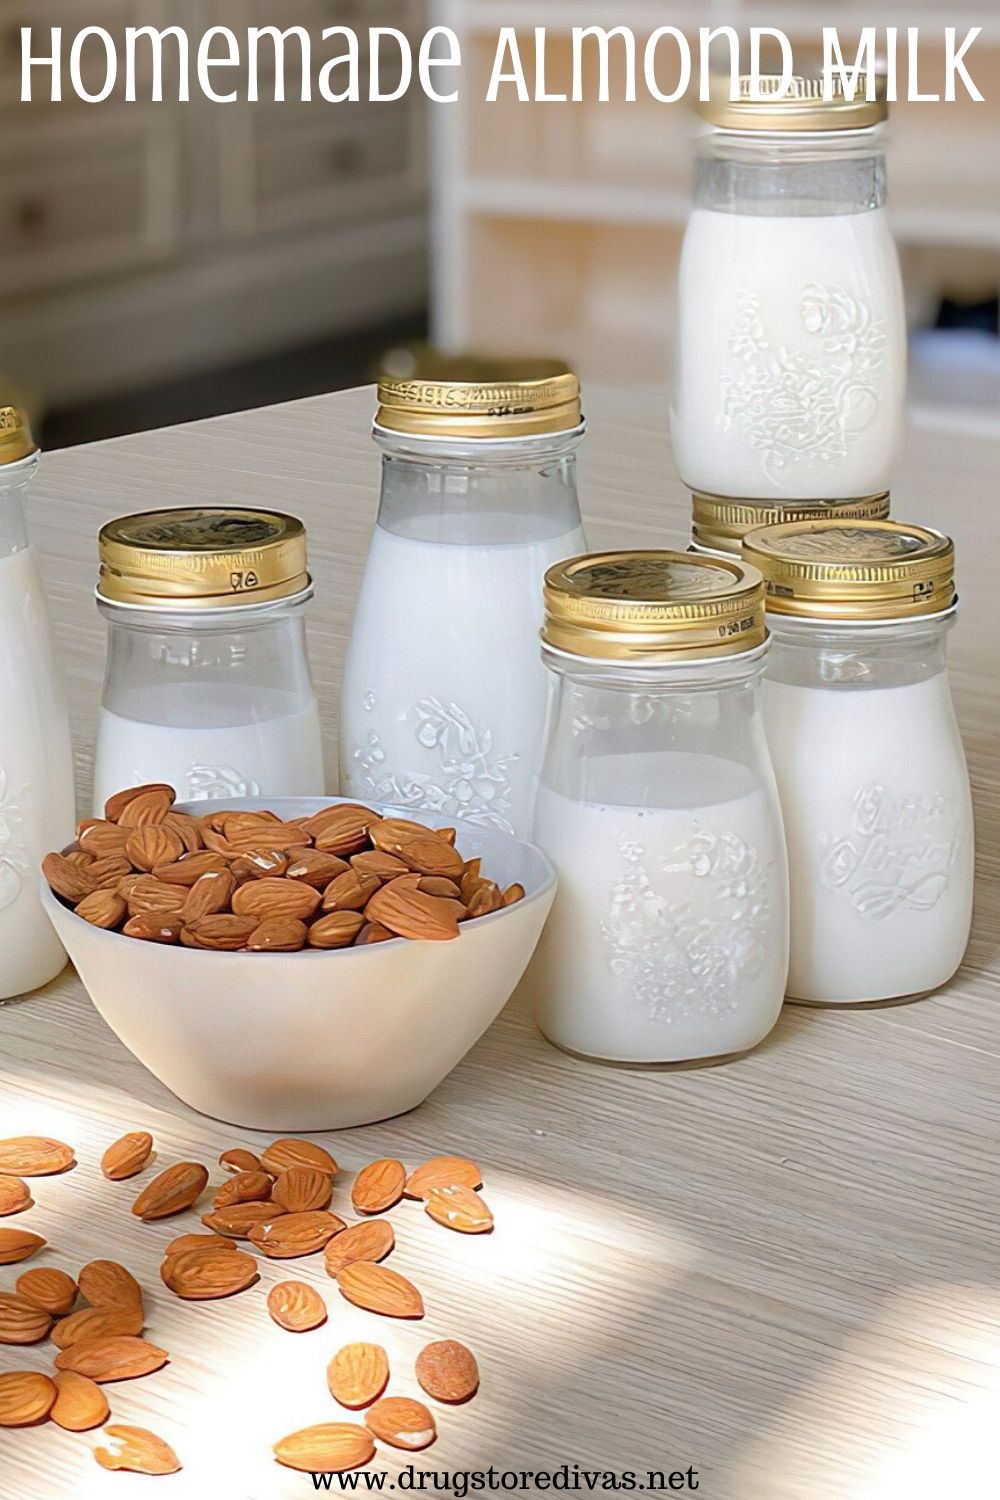 A bowl of almonds surrounded by bottles of milk and the words "Homemade Almond Milk" digitally written on top.